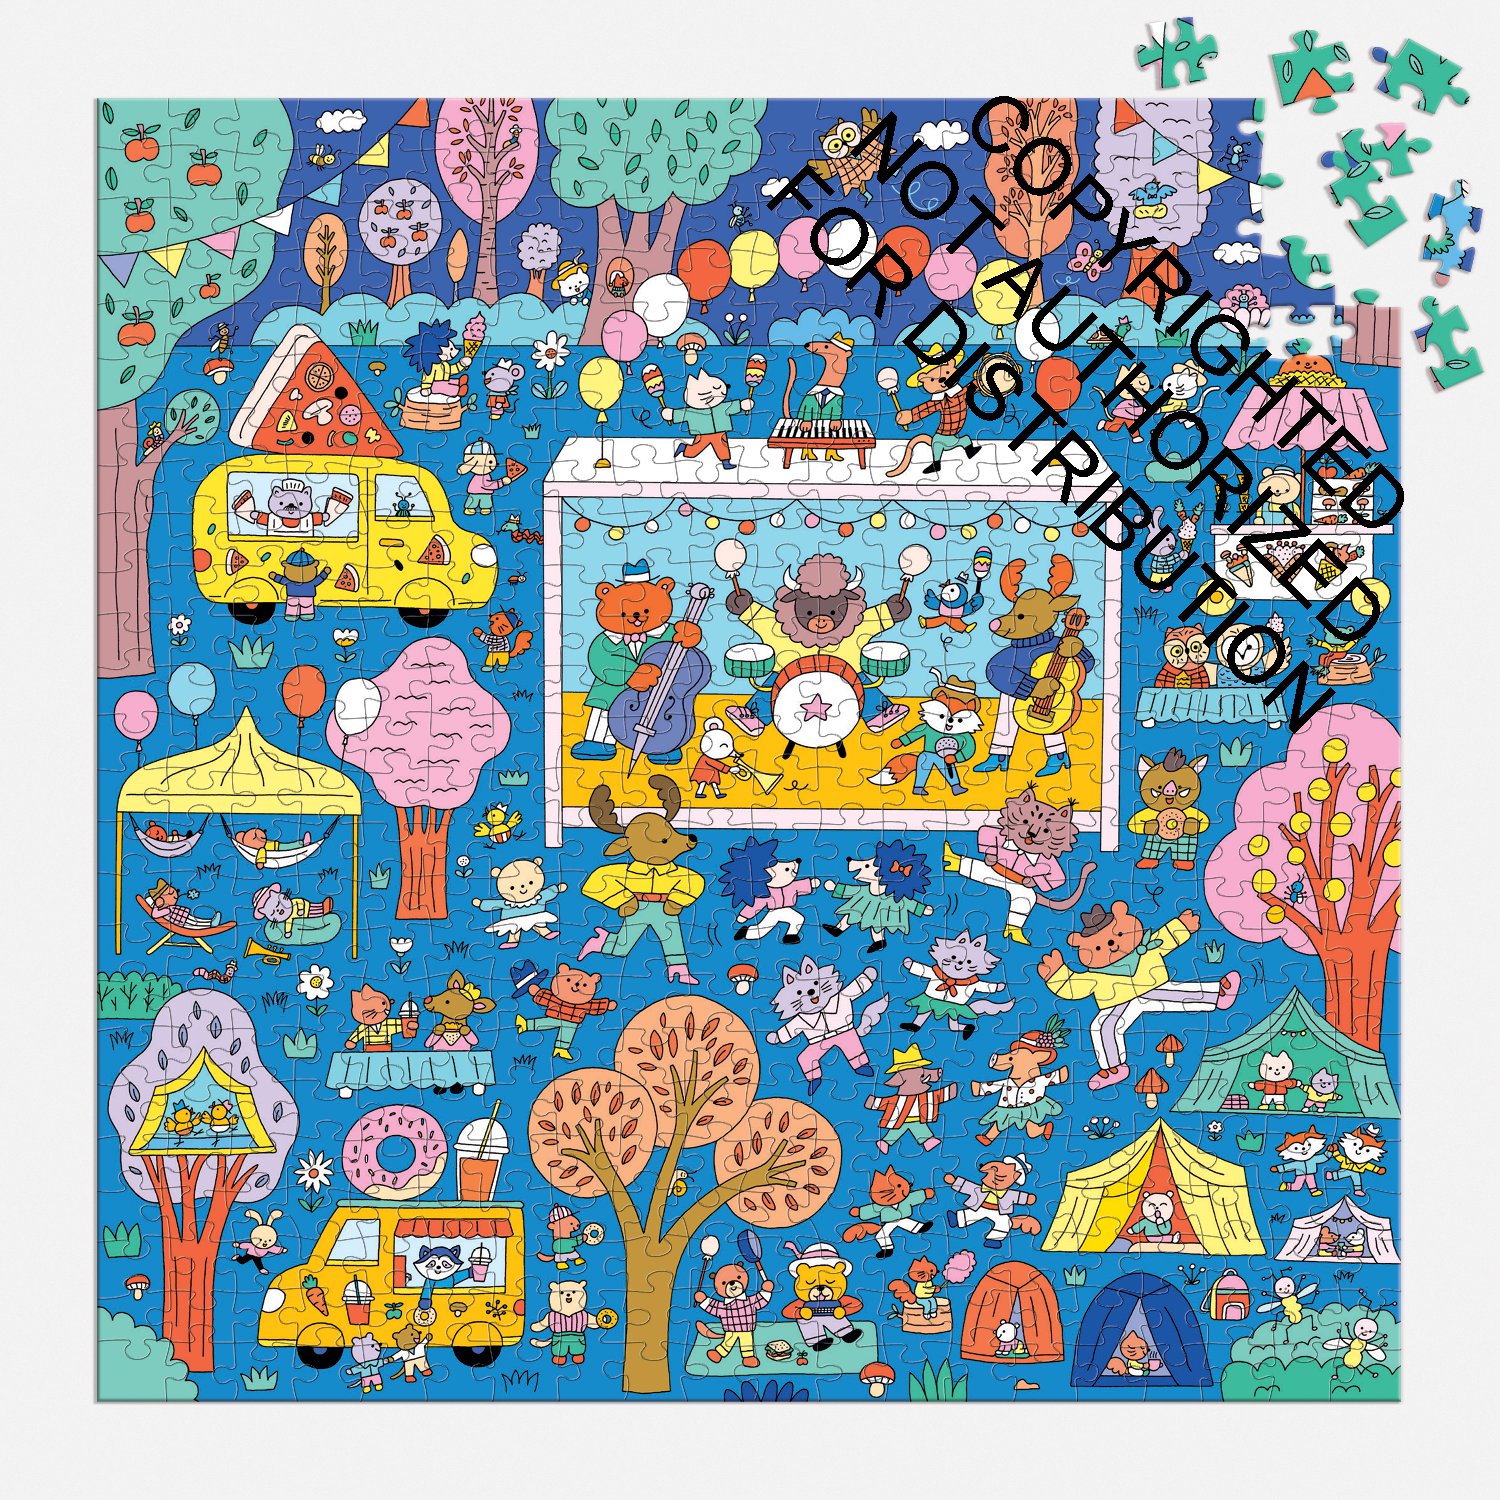 Music Festival 500 Piece Search and Find Family Puzzle